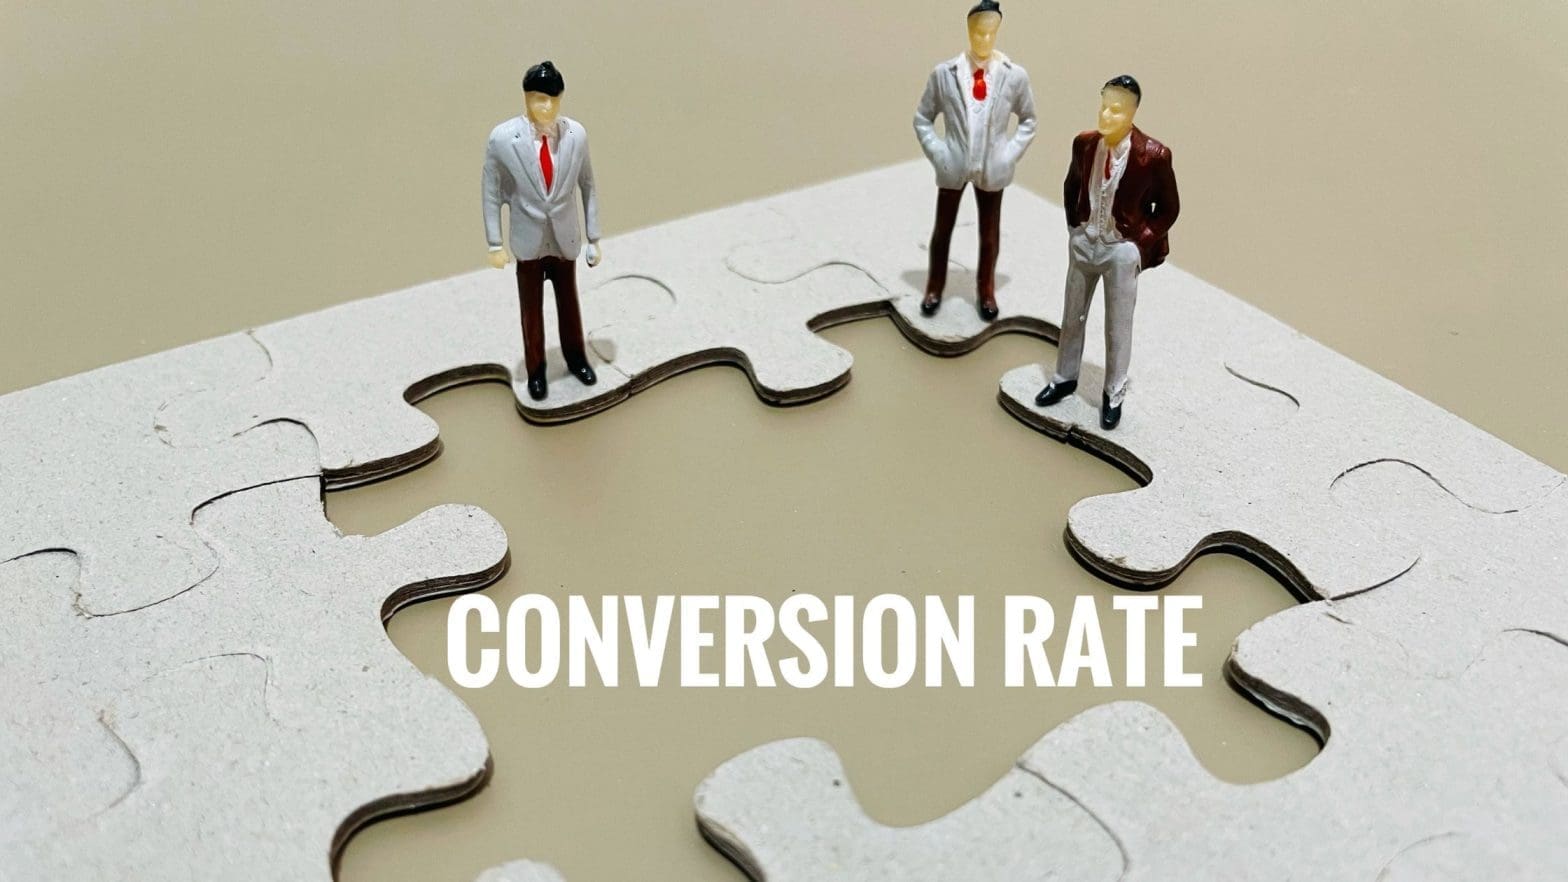 10 Tips to Improve the Conversion Rate of Your Landing Pages